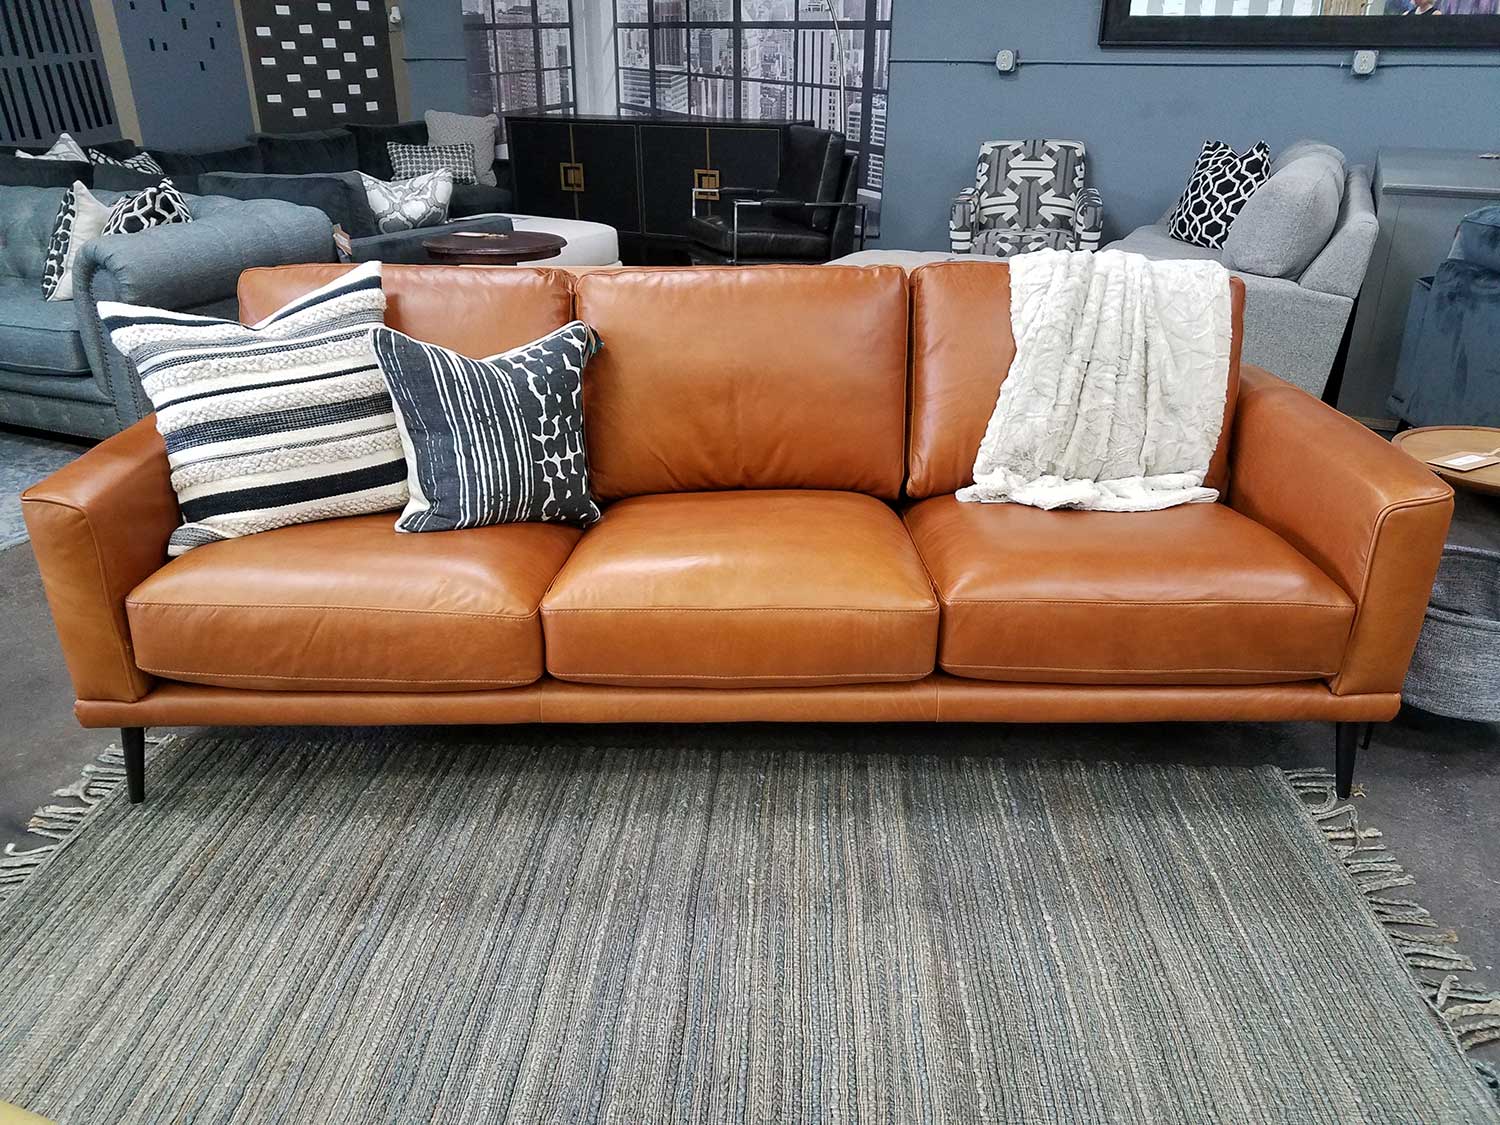 decorating with leather sofa